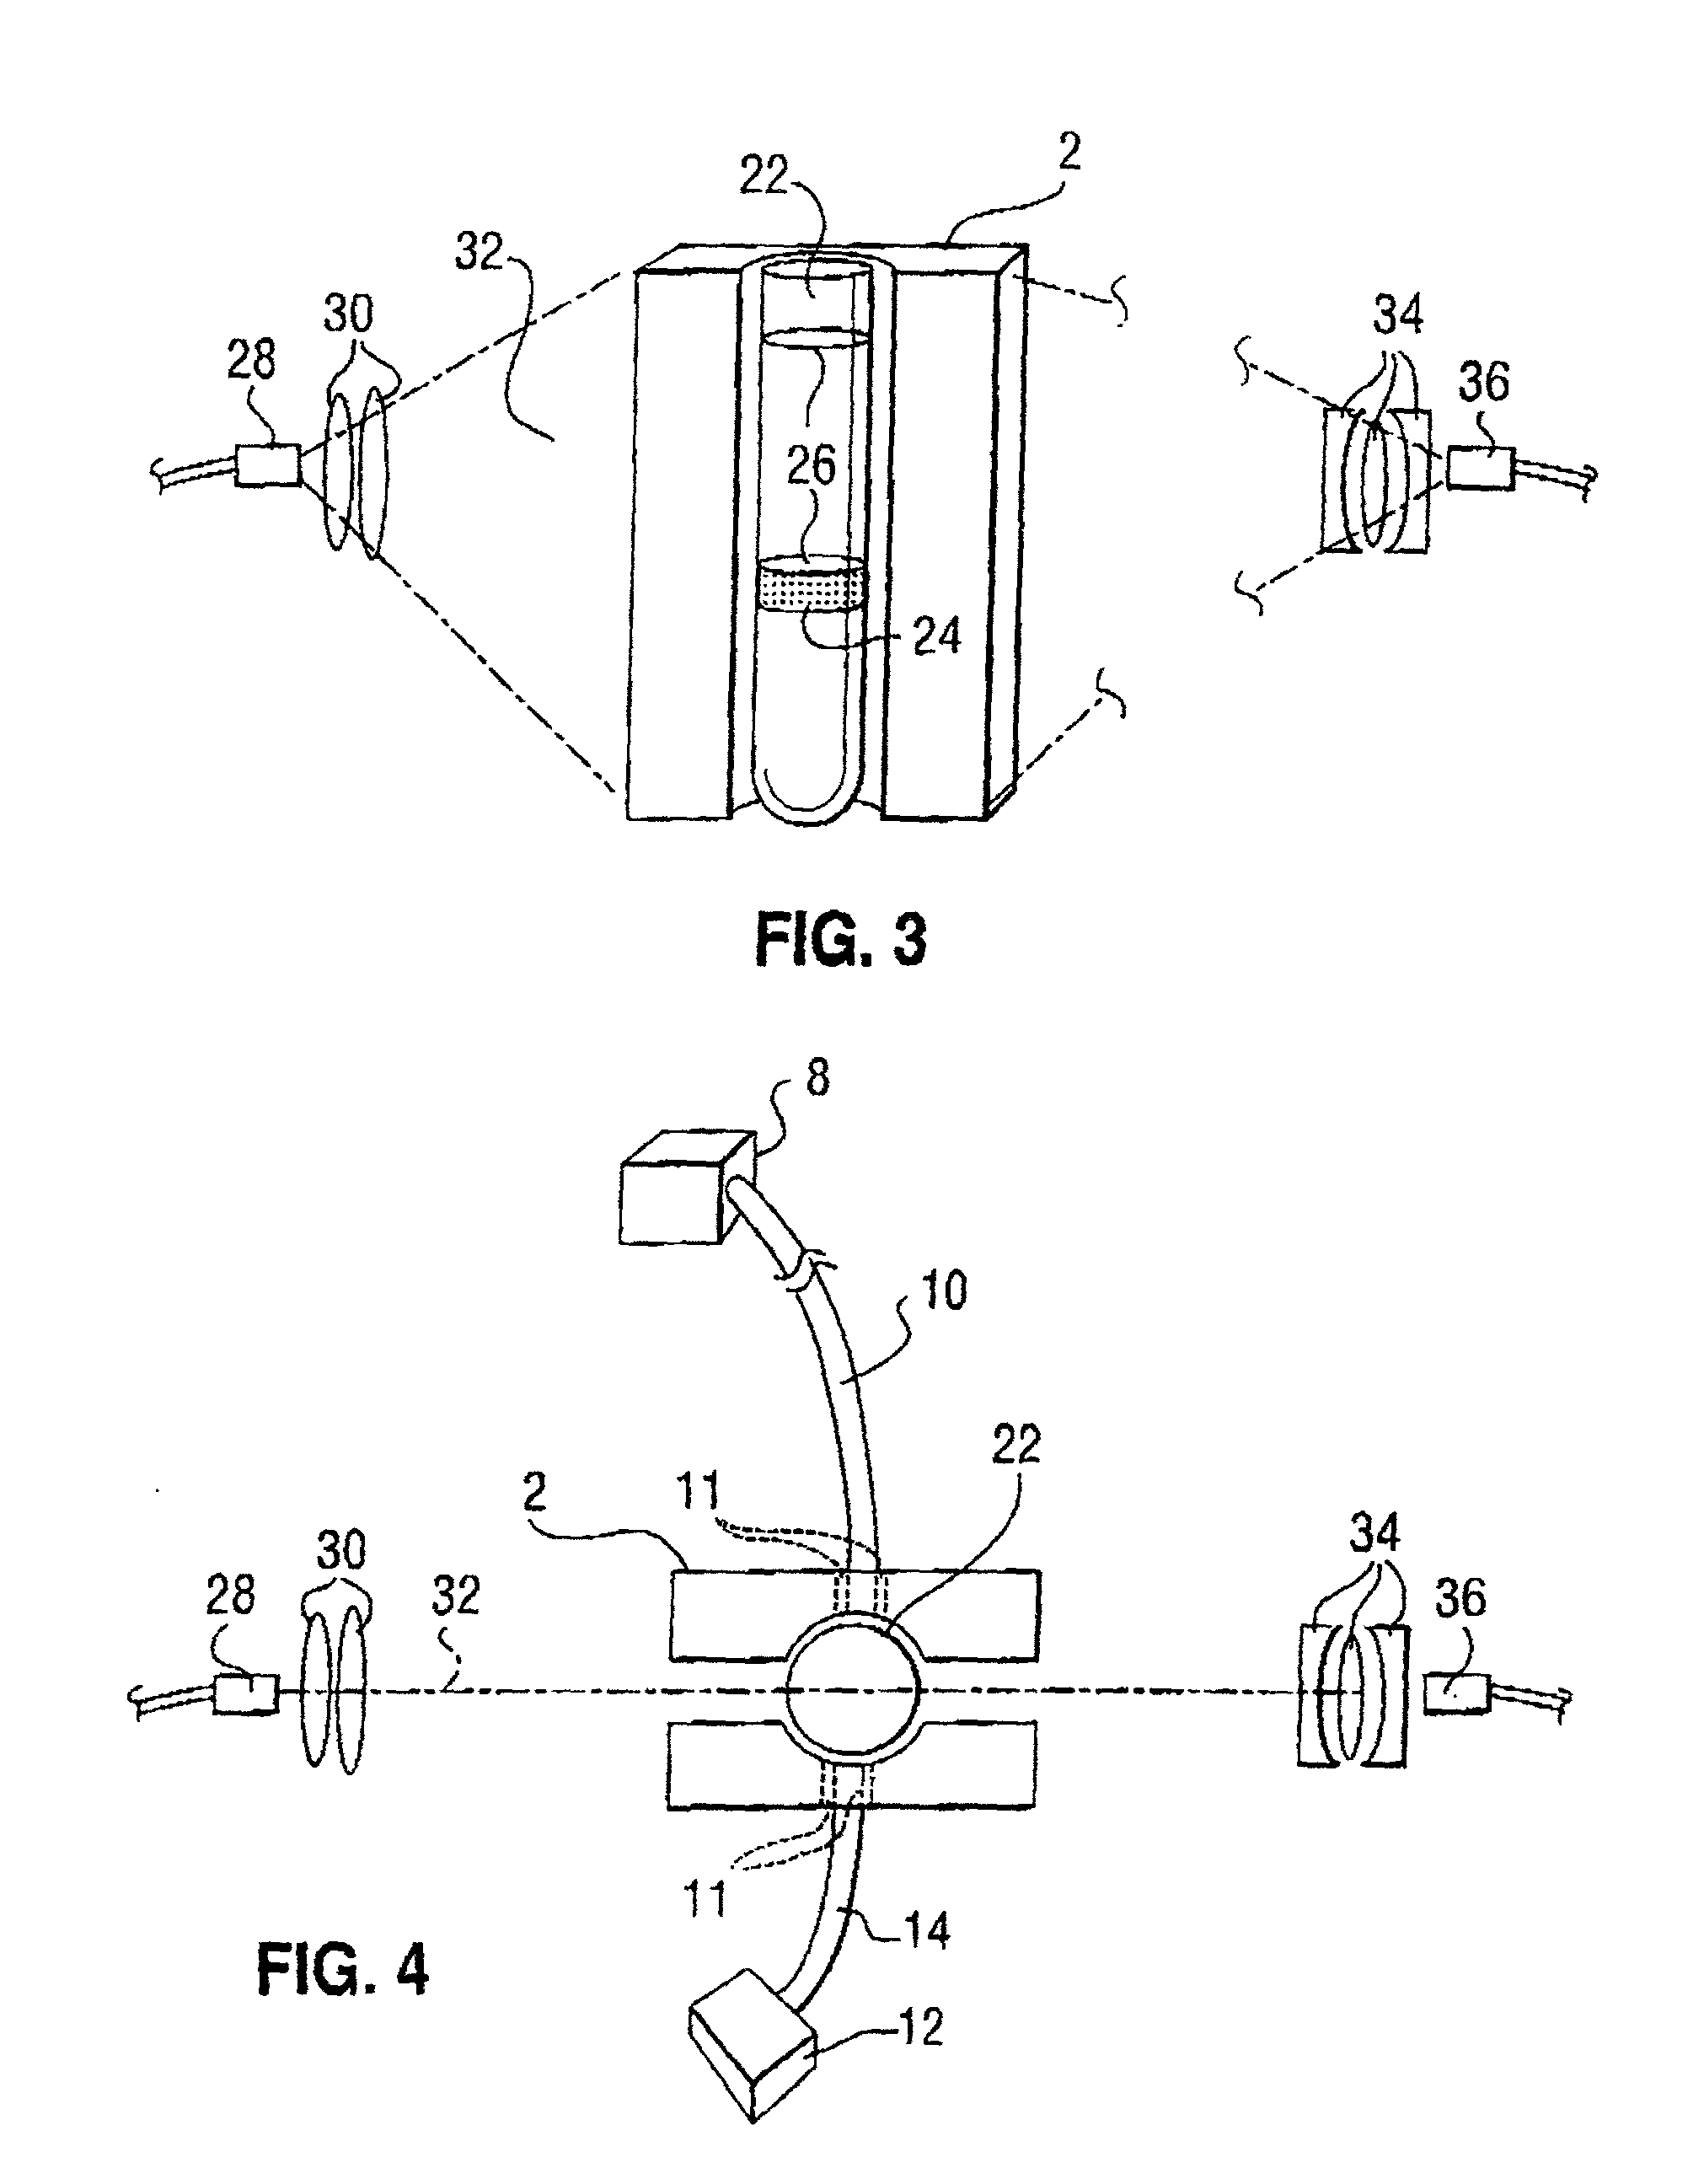 Apparatus and method for rapid spectrophotometric pre-test screen of specimen for a blood analyzer